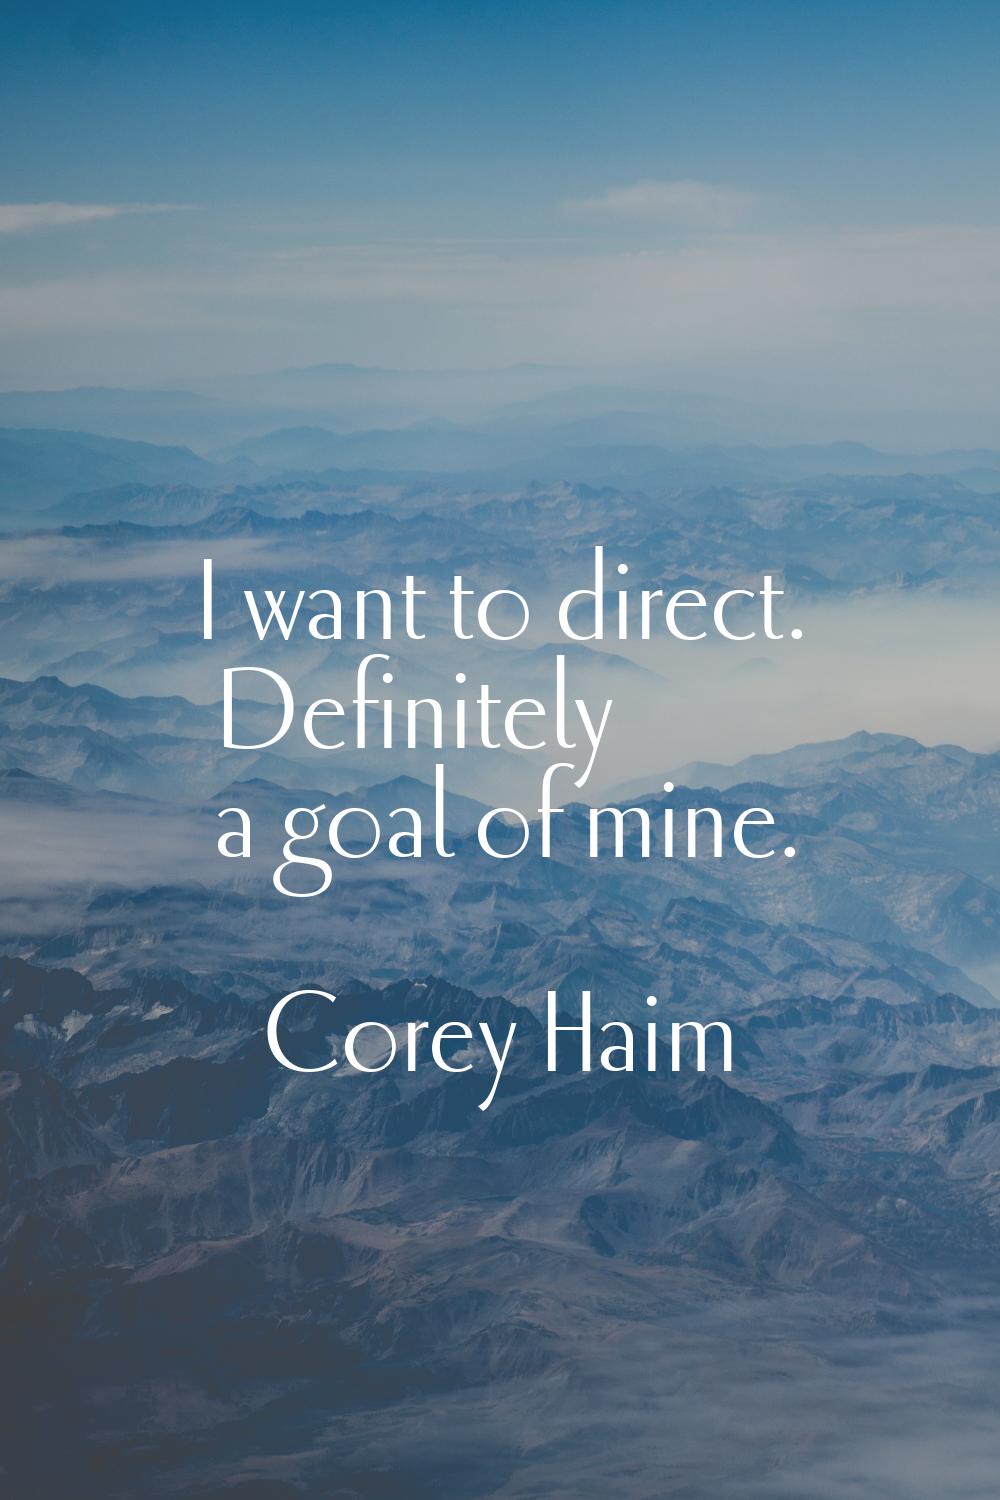 I want to direct. Definitely a goal of mine.